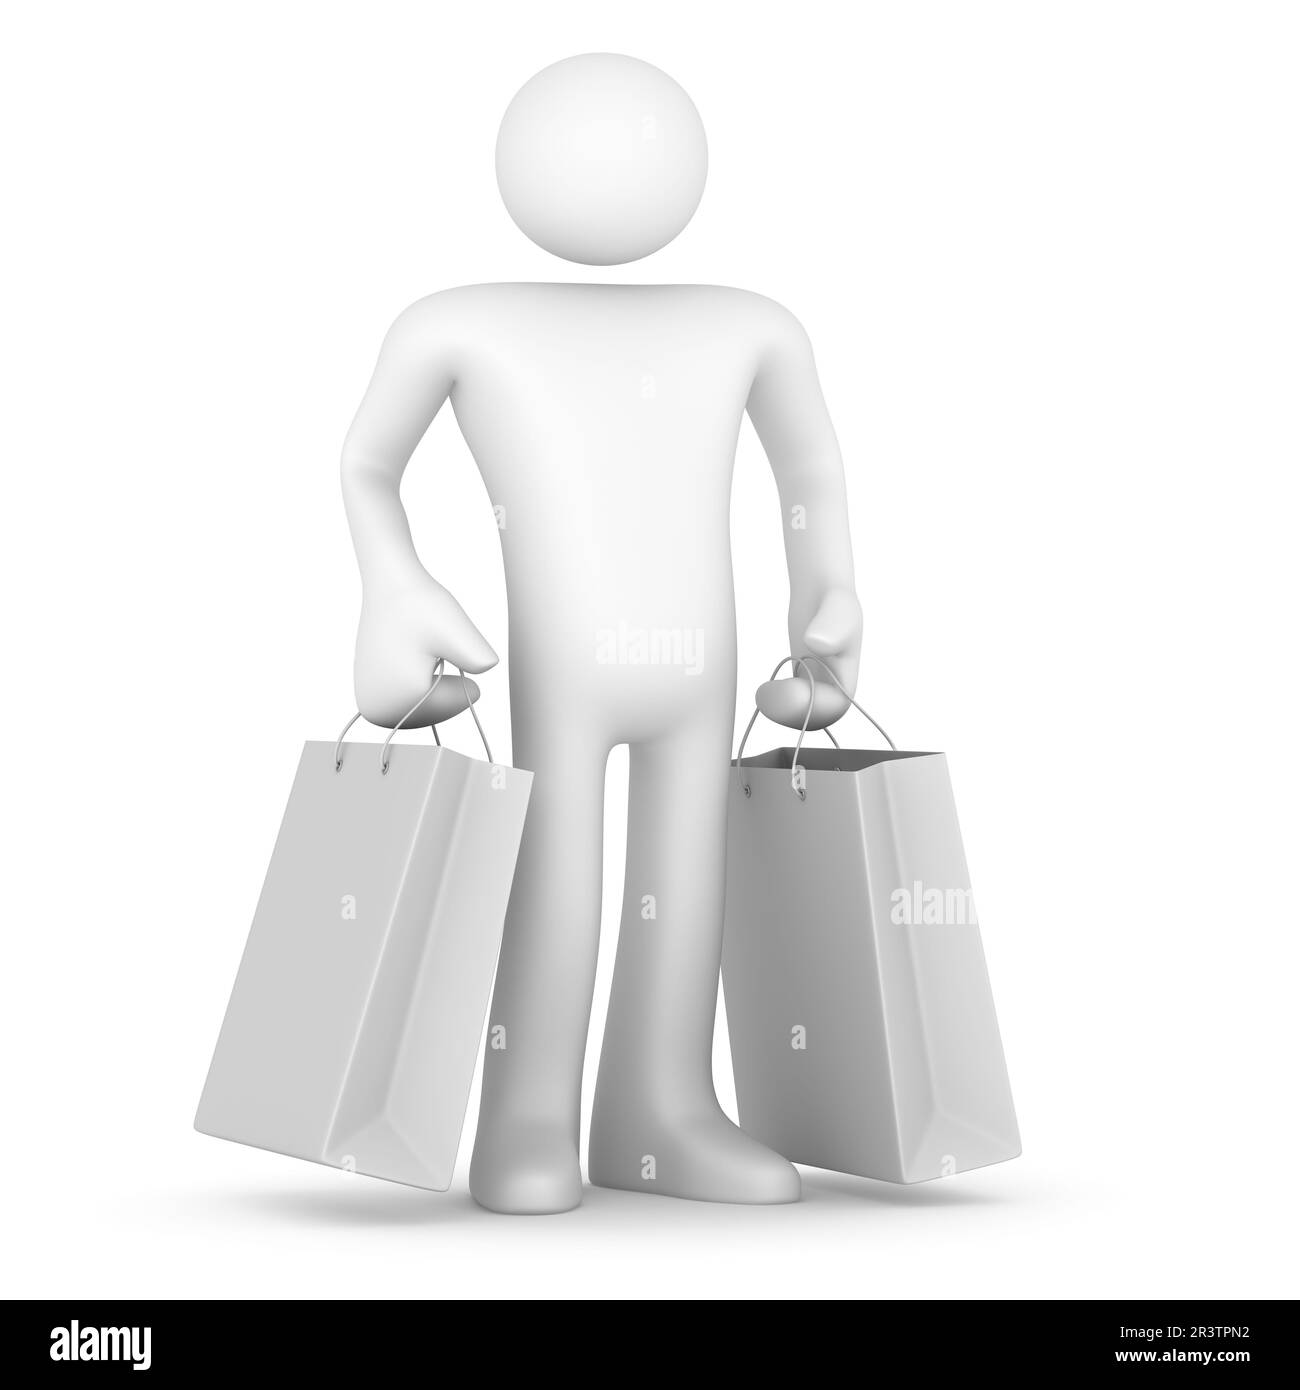 Man with Shopping Bag Stock Photo